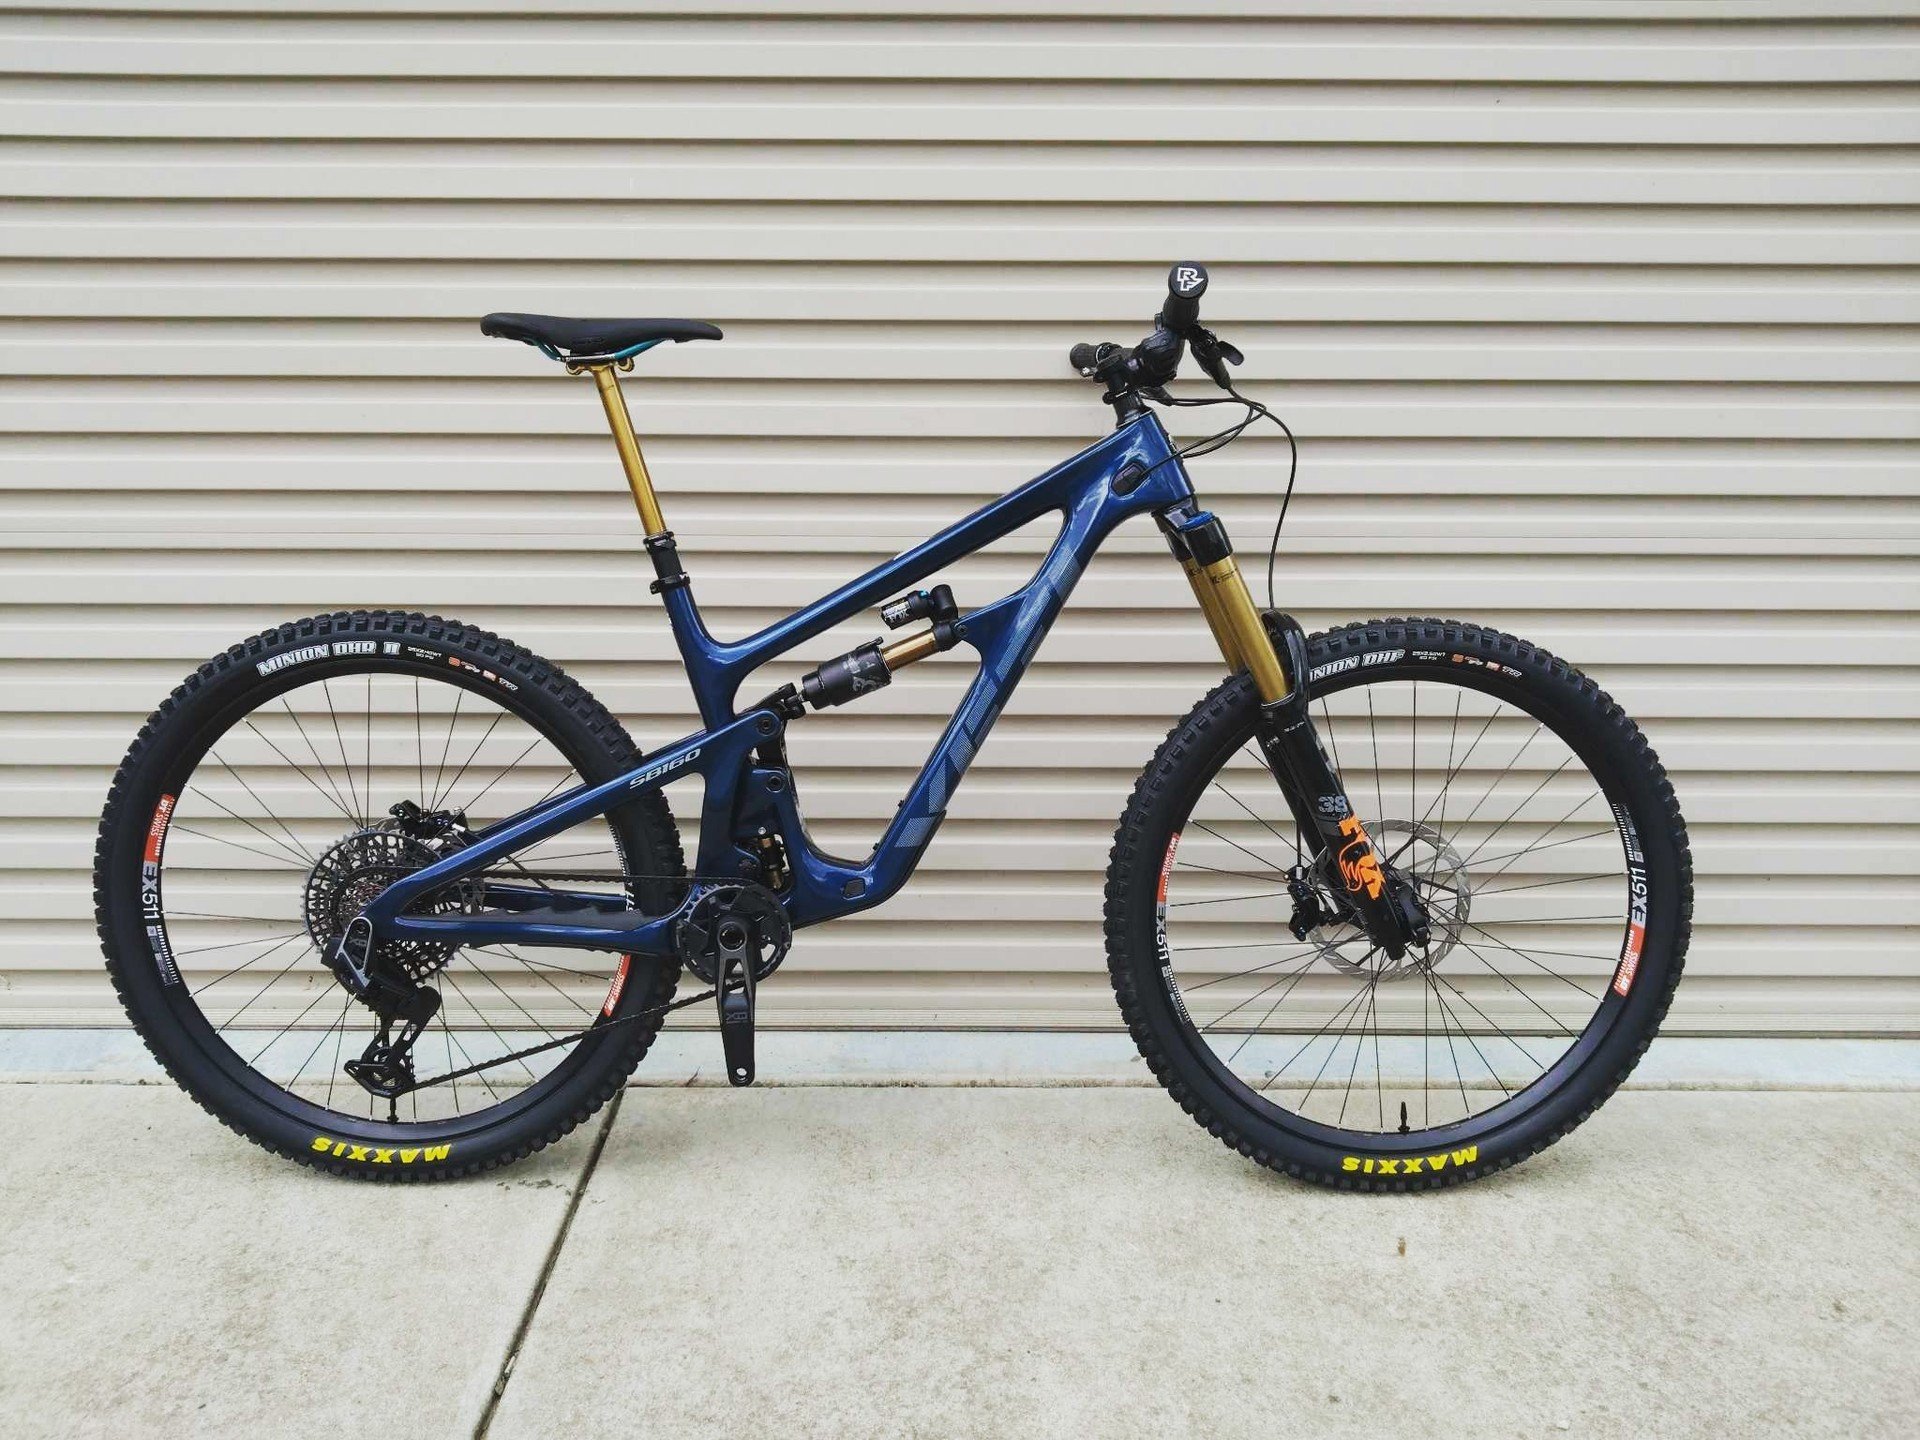 🔥Yeti SB160 Turq cobalt🔥
Latest custom build to come off the work stand.

A pleasure to bring this one to life.
Head to the webpage for details (see link int bio).

@rowneysports @sram_australia @psicycling @dtswiss_distributor_aus @kwt_imports @ma